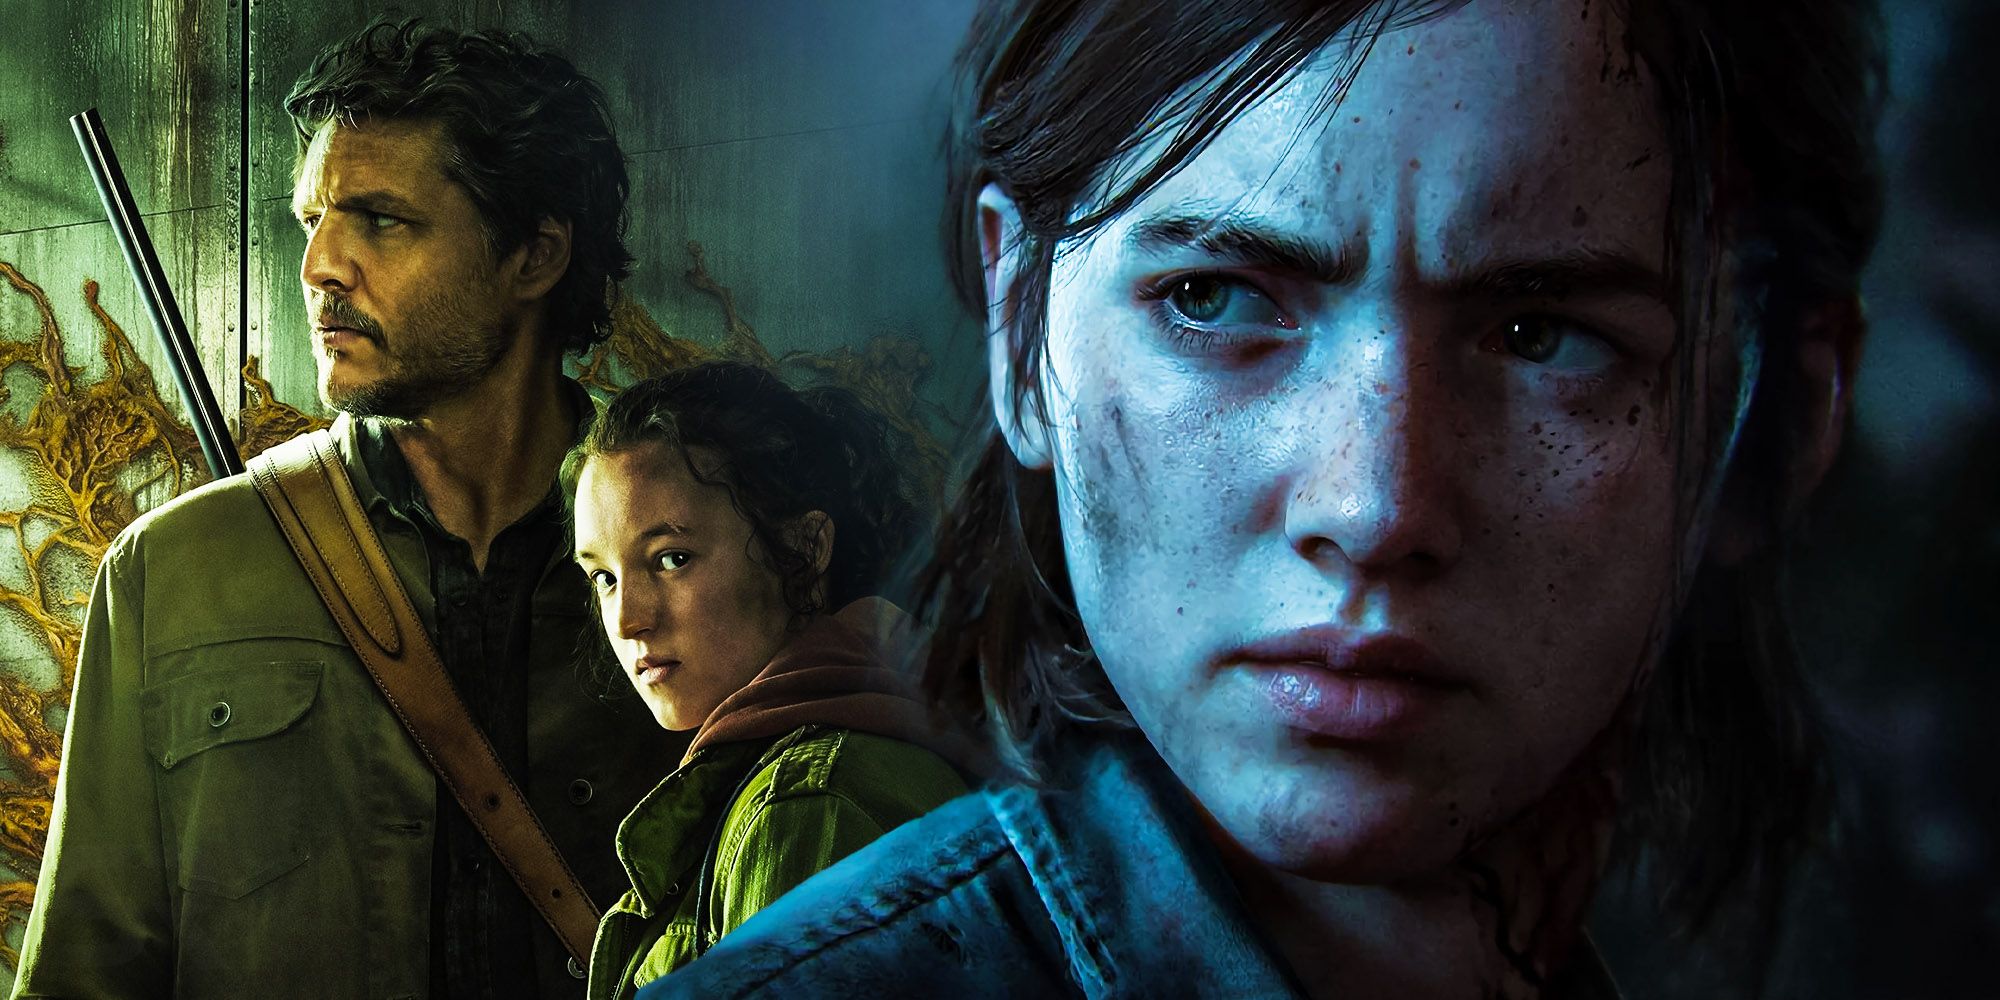 The Last of Us' Episode 2 Makes Some Major Changes to Game's Story - CNET